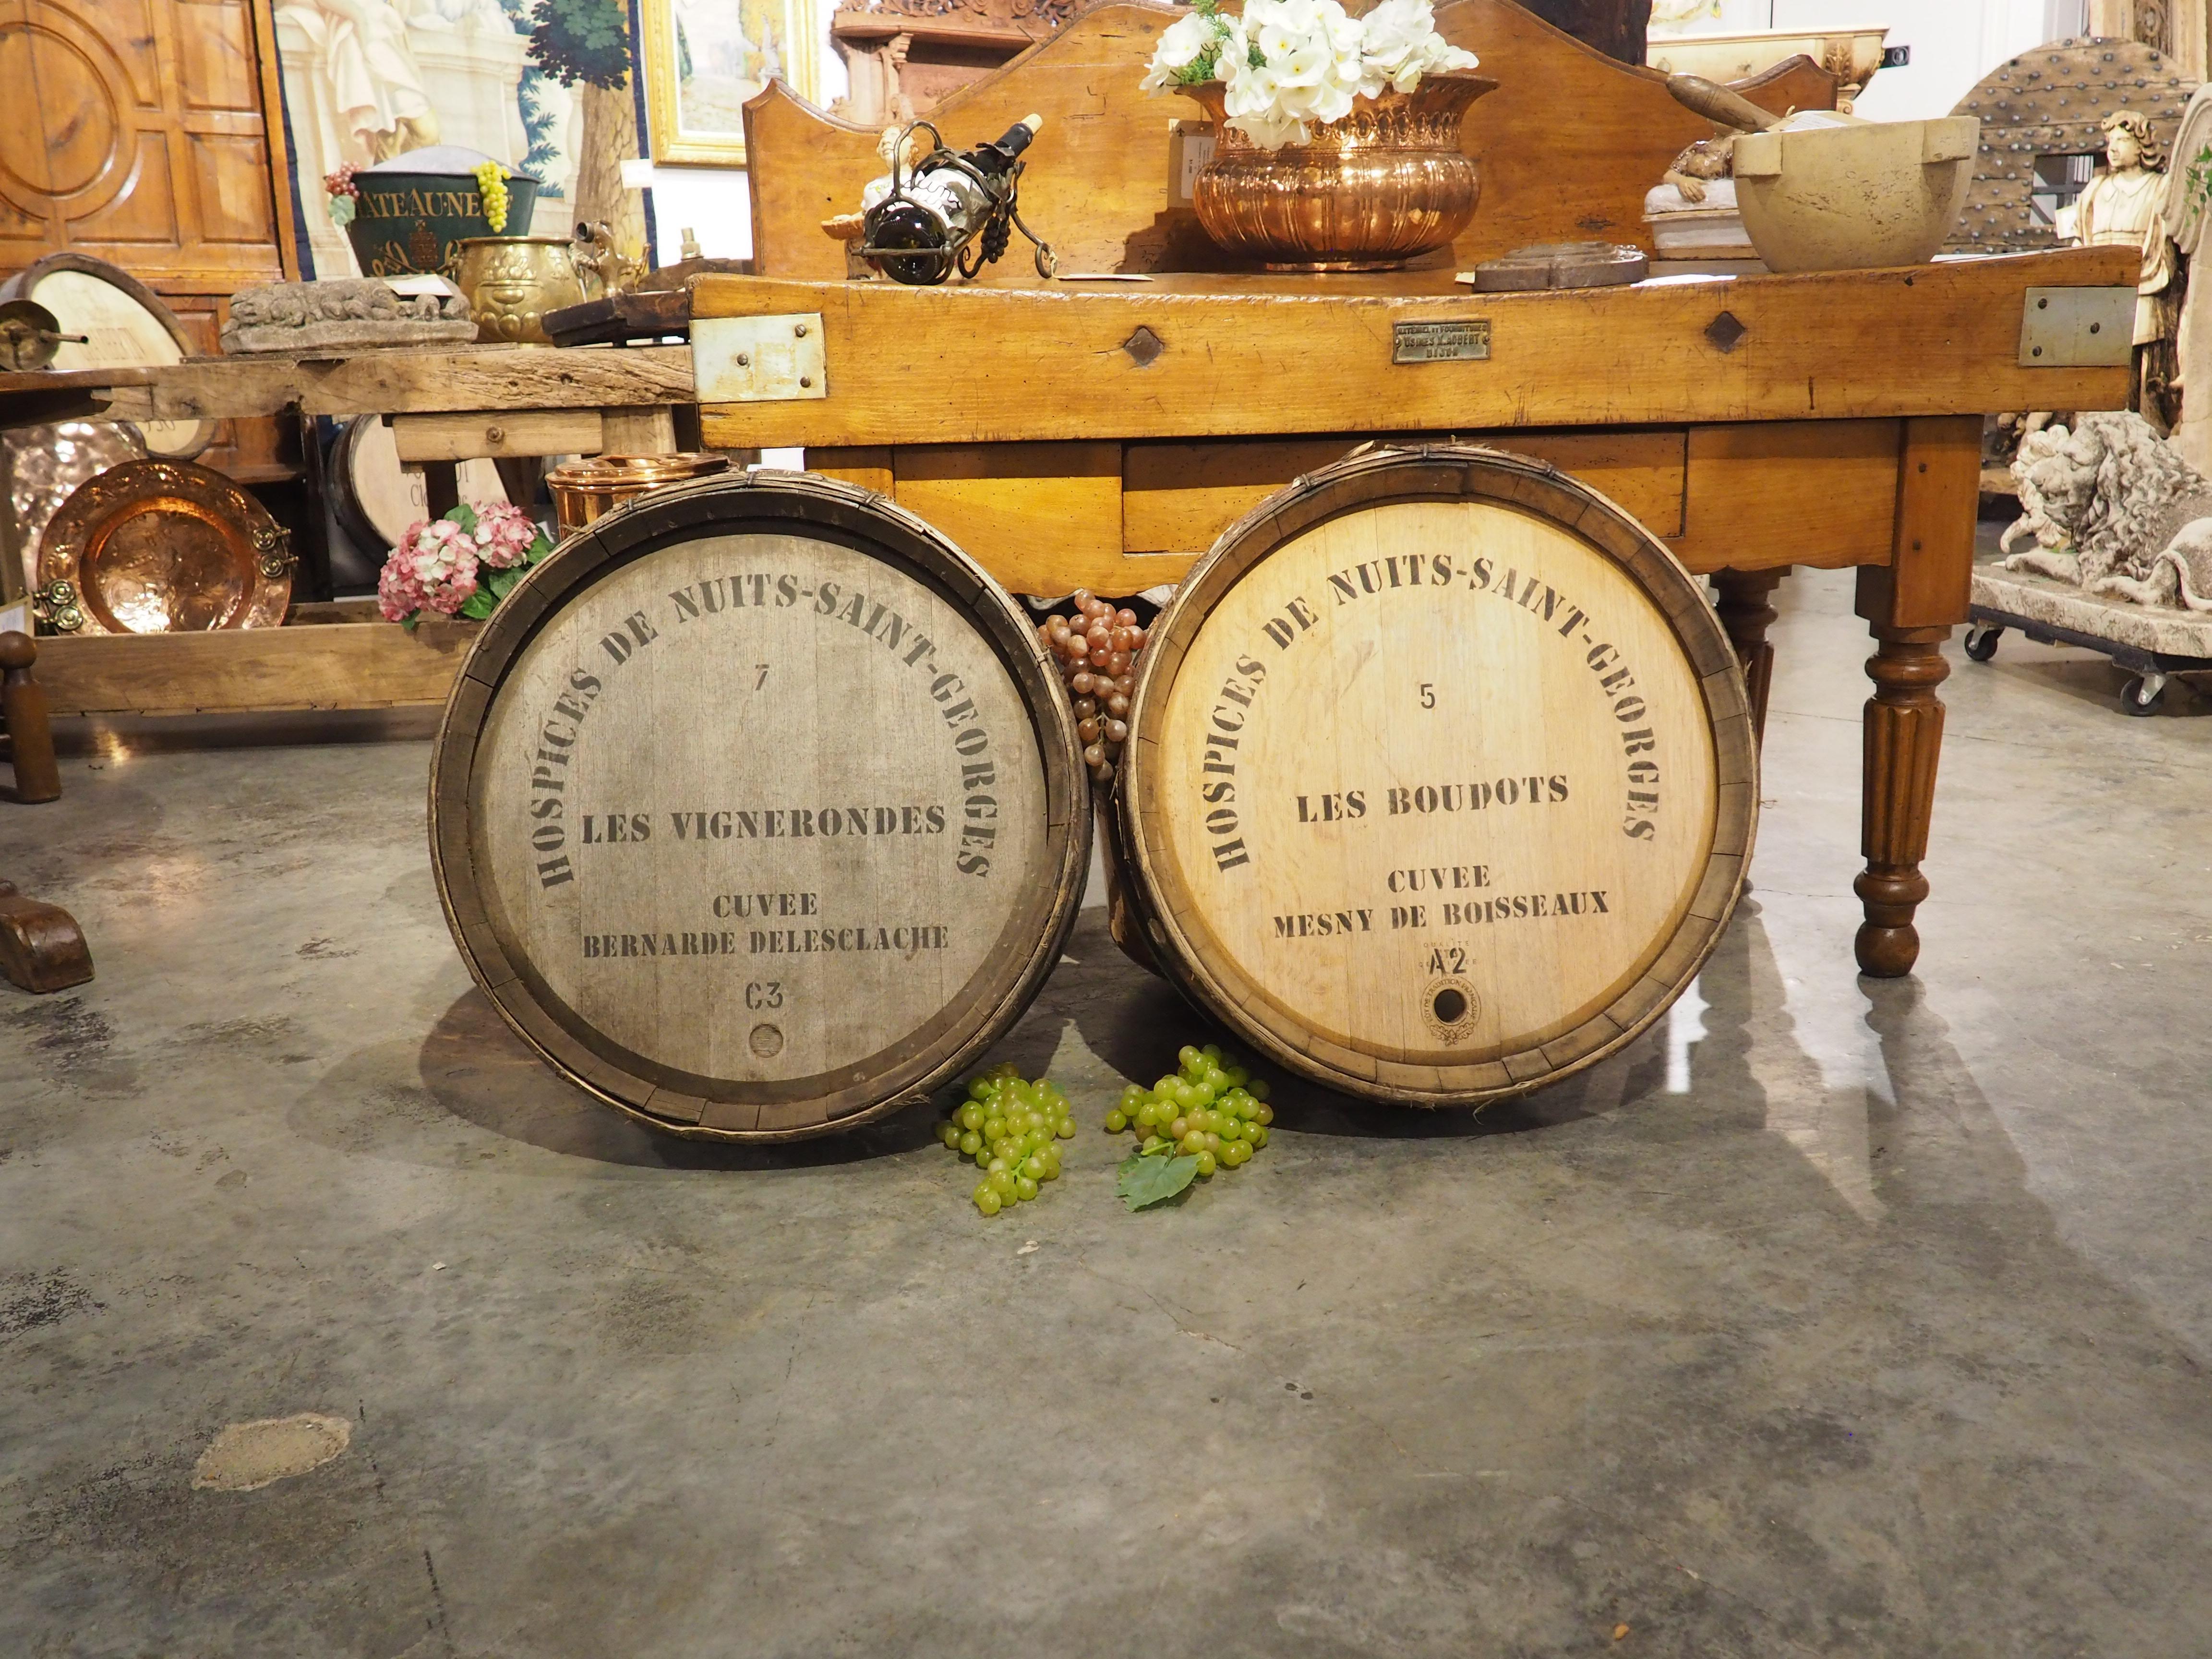 Pair of French Wine Barrel Facades, “Hospices de Nuits-Saint-Georges”, 1900s For Sale 7